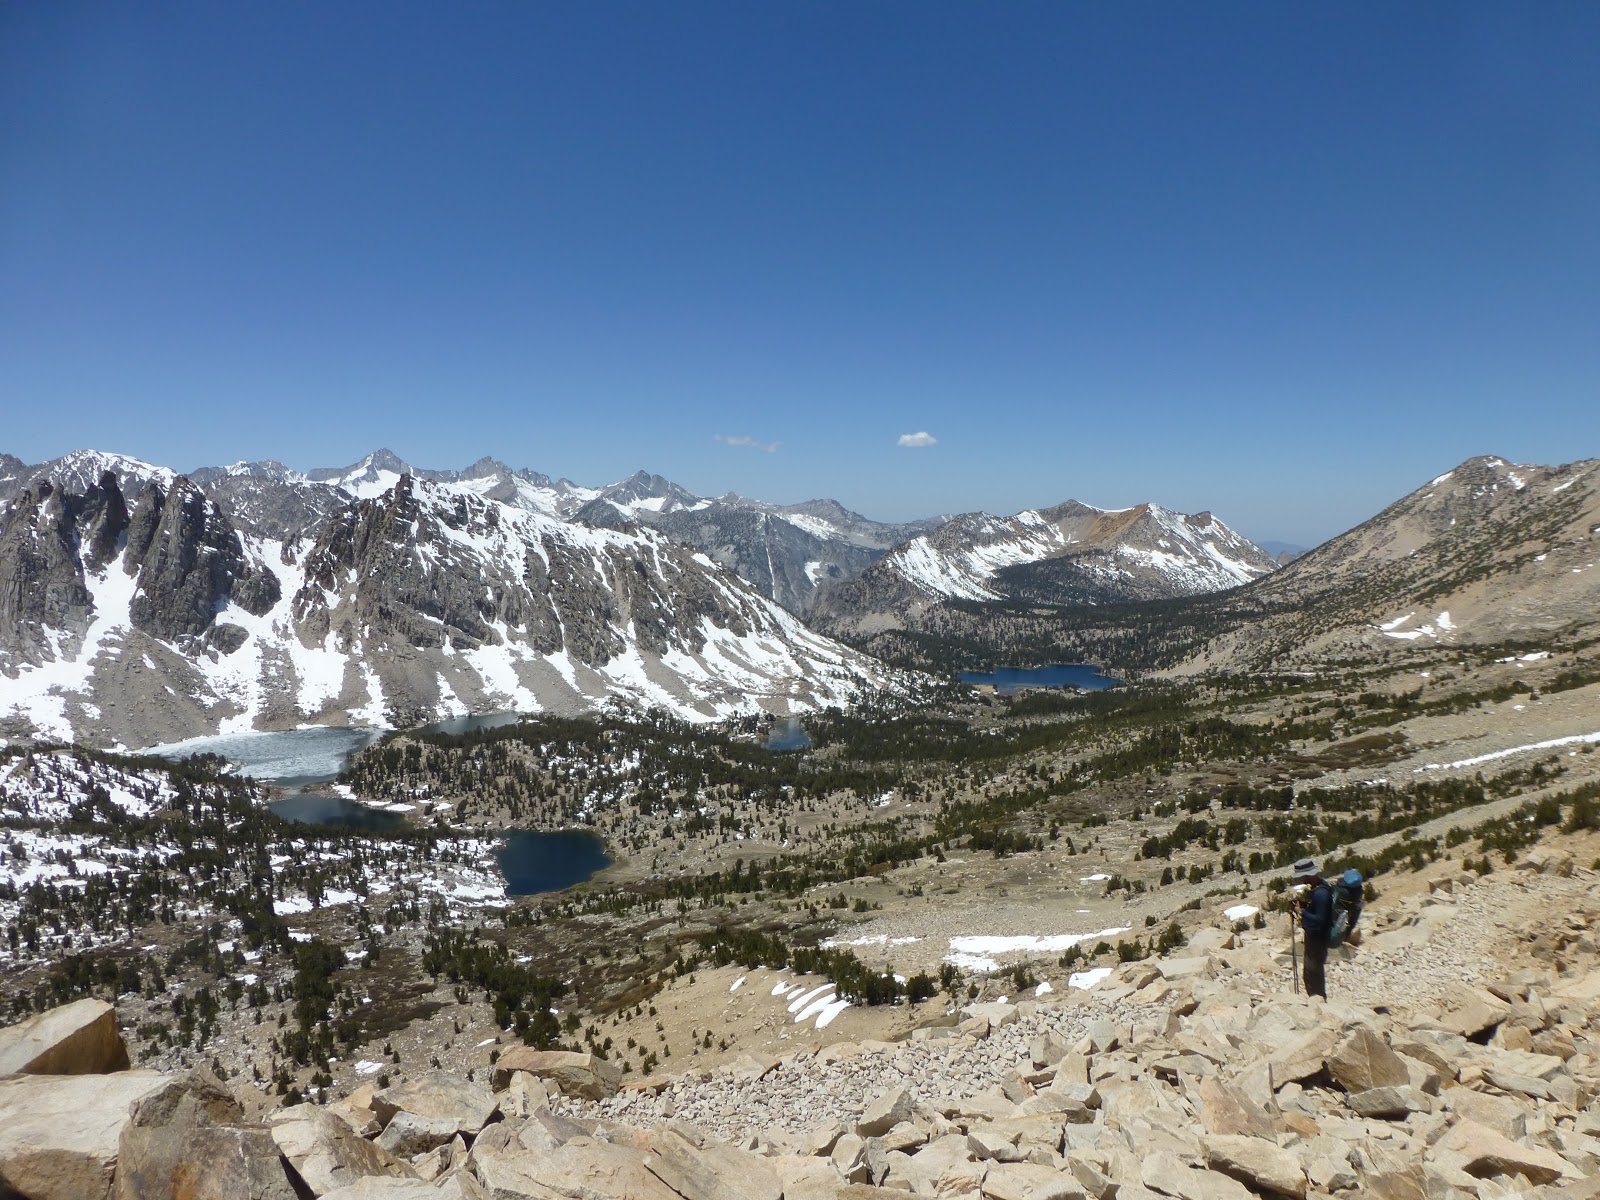 Another view, from Kearsarge Pass